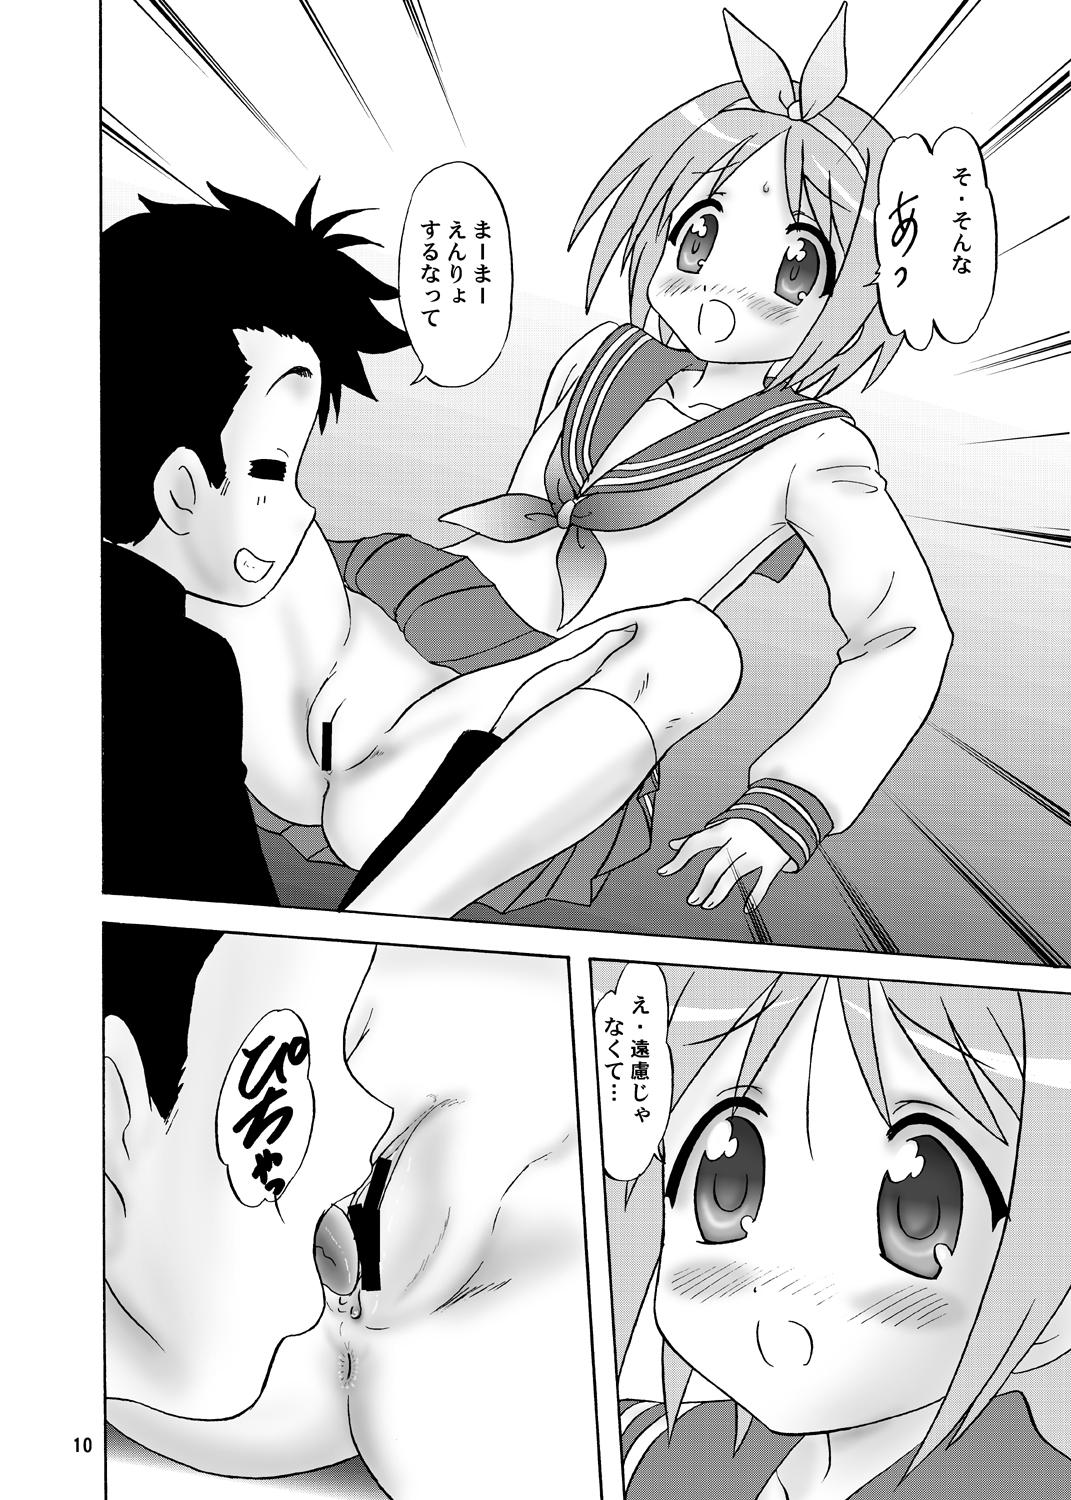 Step Fantasy Ganbaccha Yacchaccha - Lucky star Sesso - Page 10